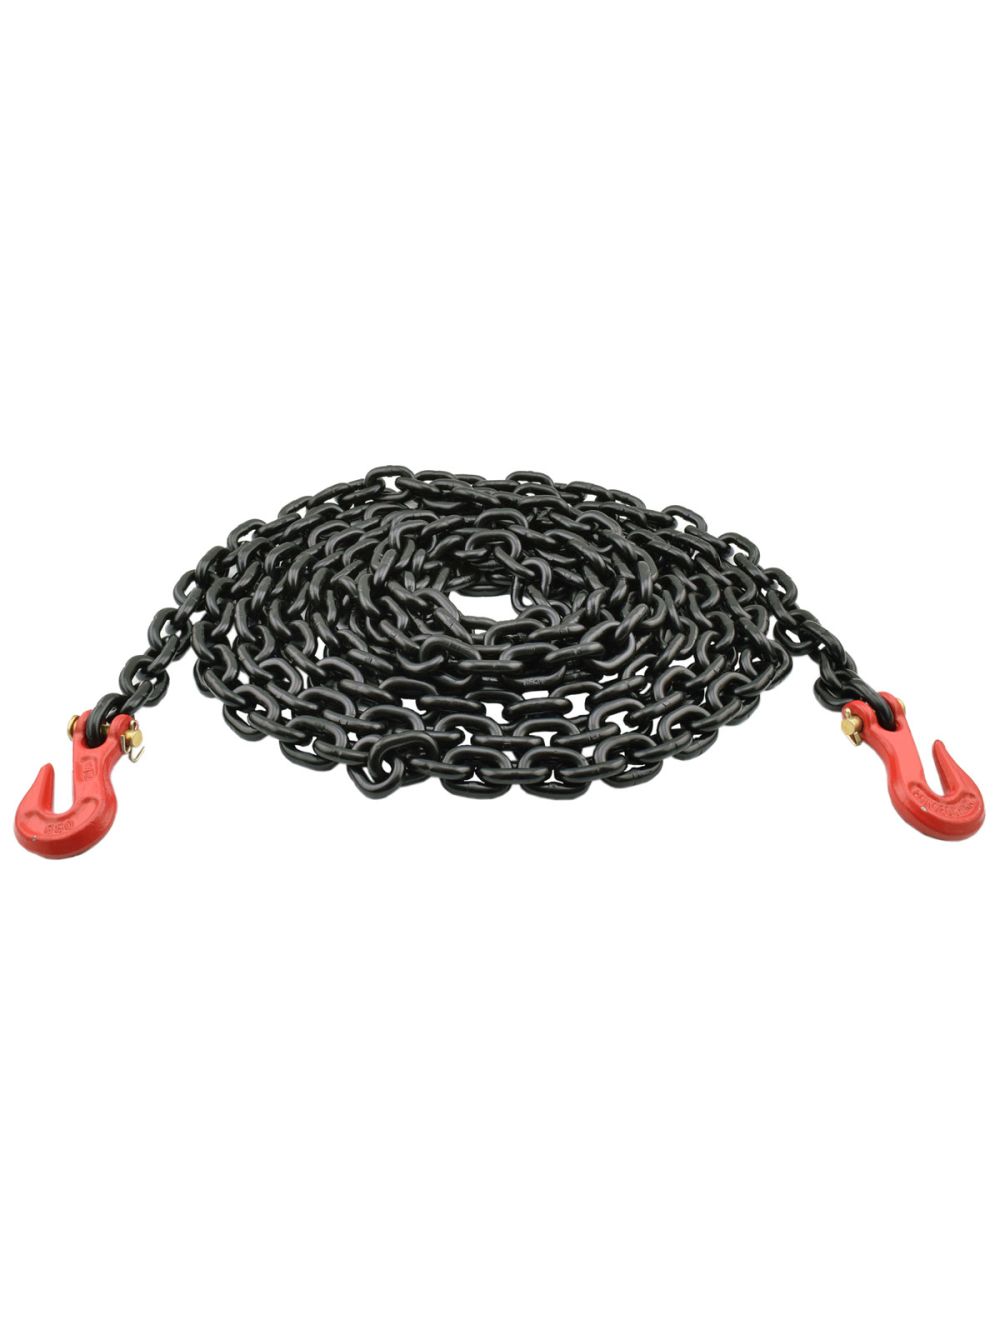 5/16 x 20' Grade 80 Black Oxide Transport Chain with Grab Hooks